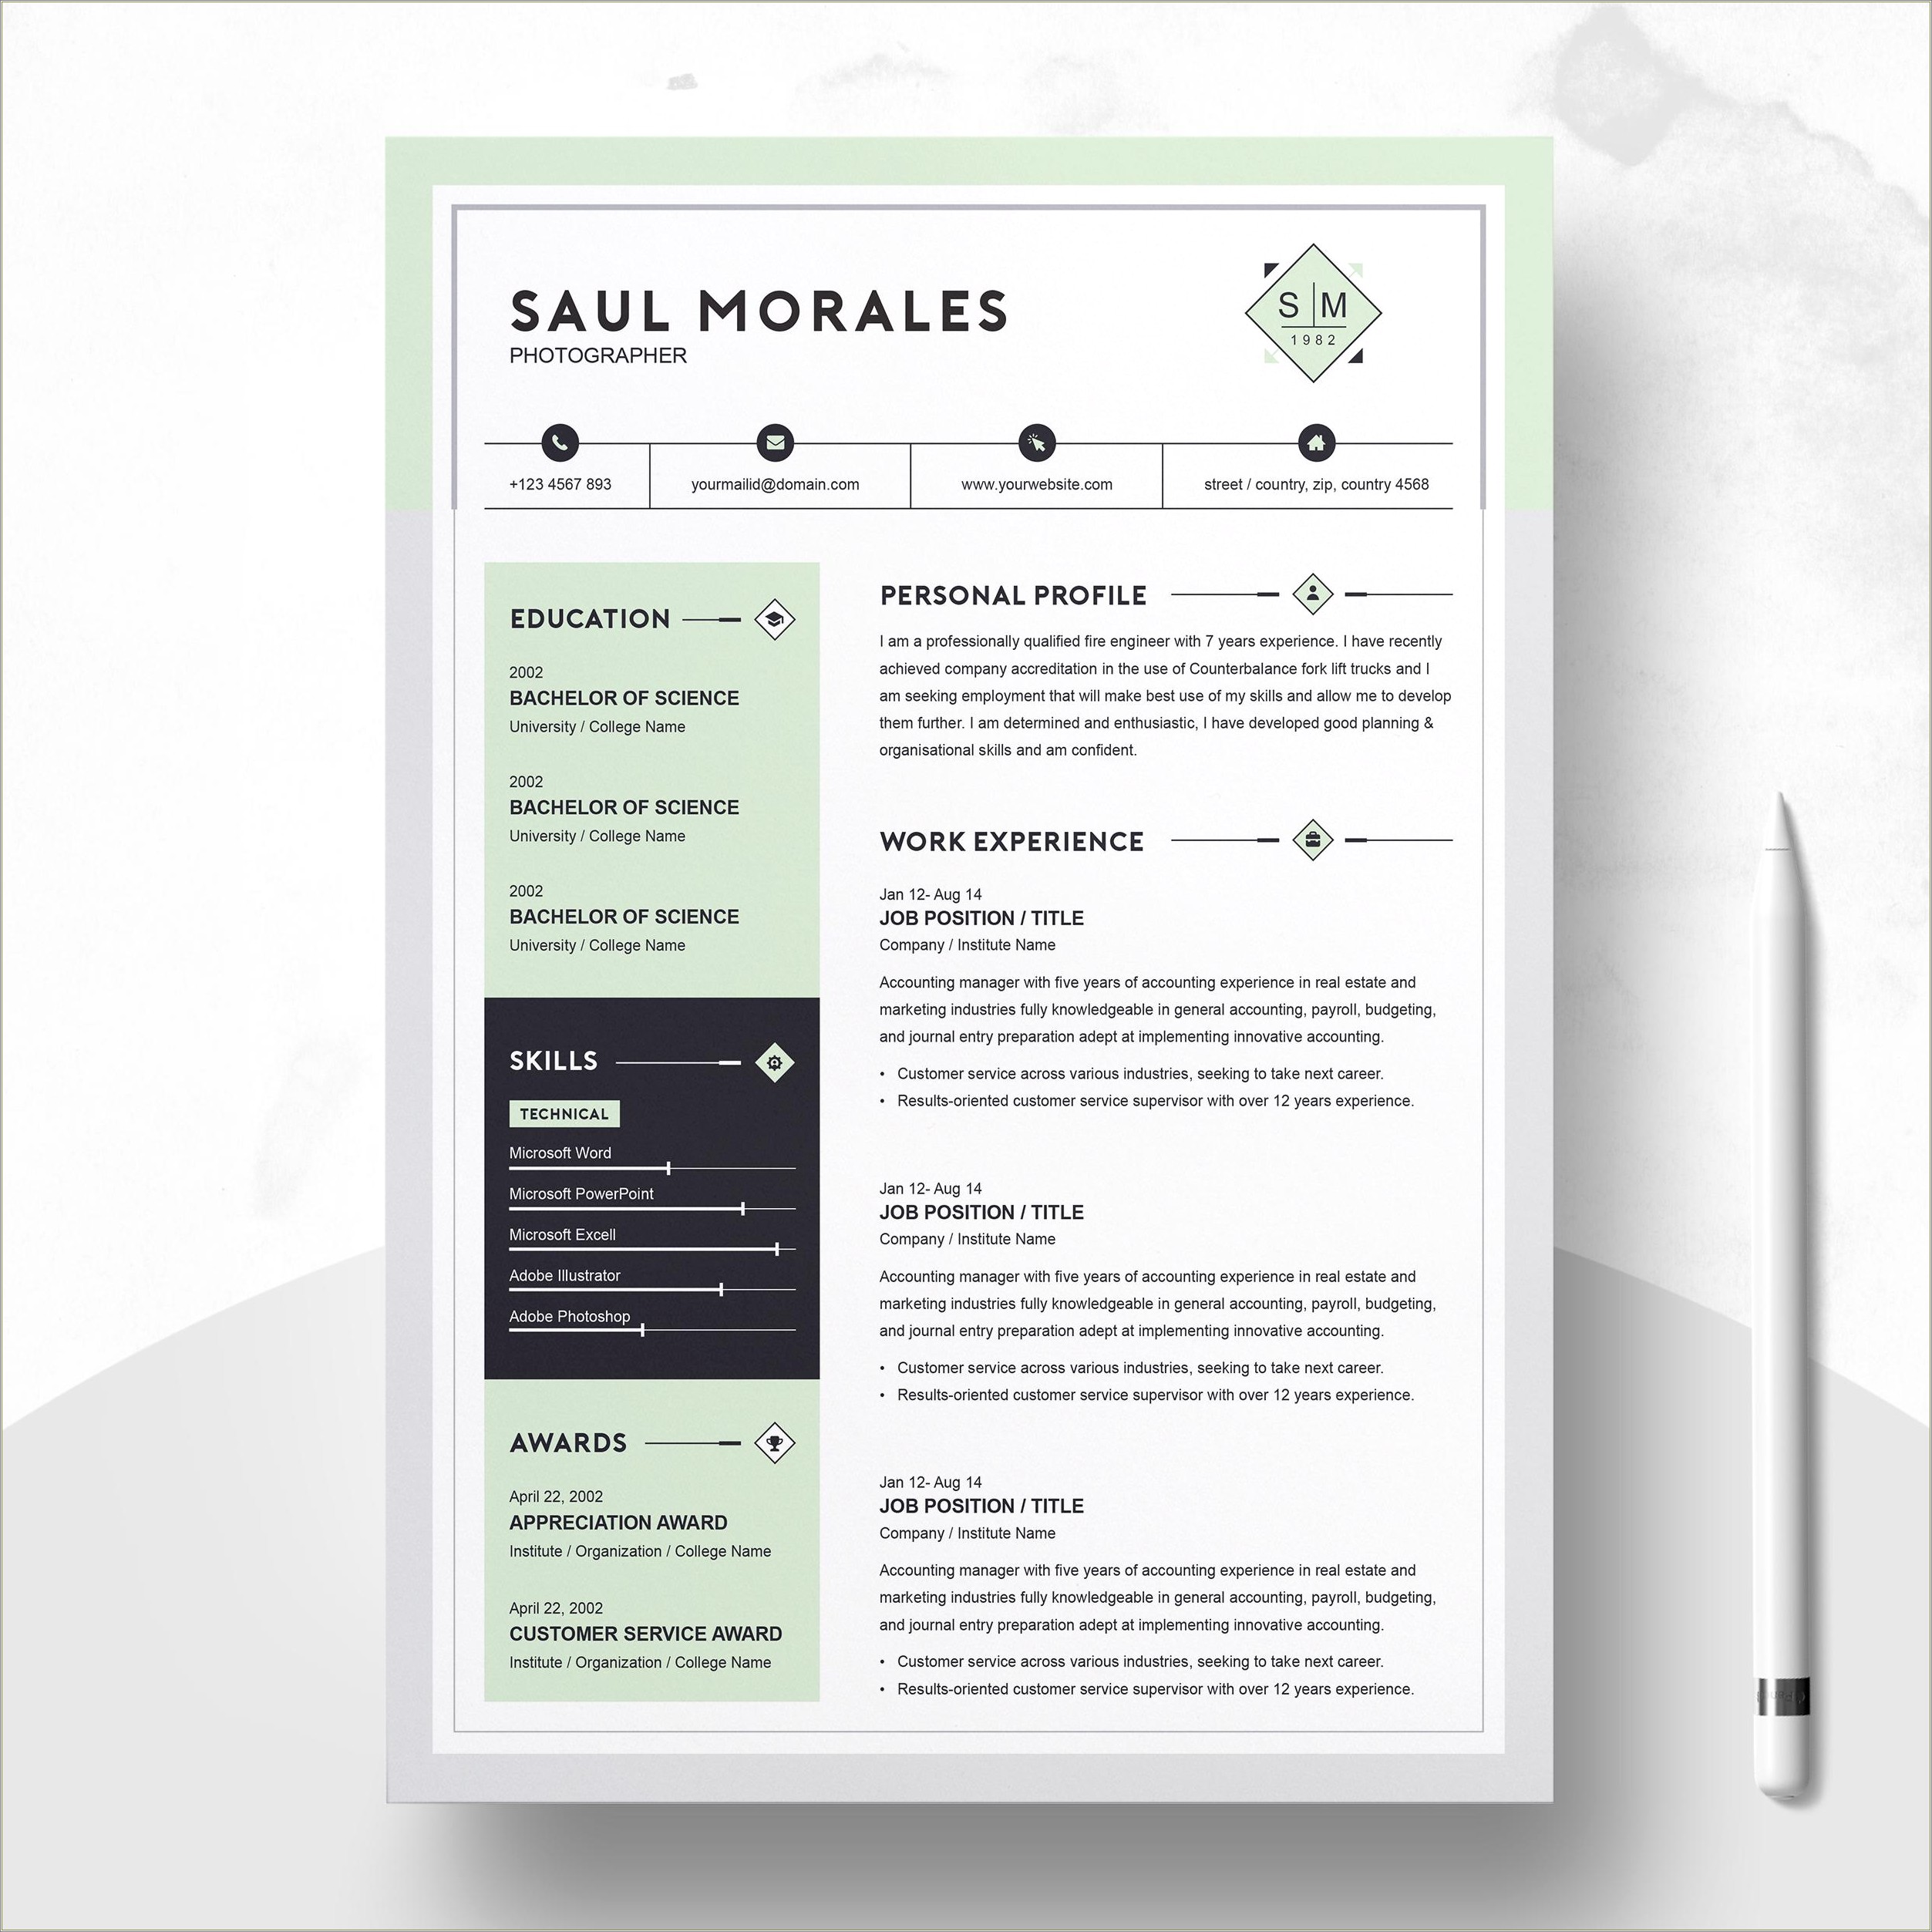 Can Anyone Suggest A Free Resume Template Site